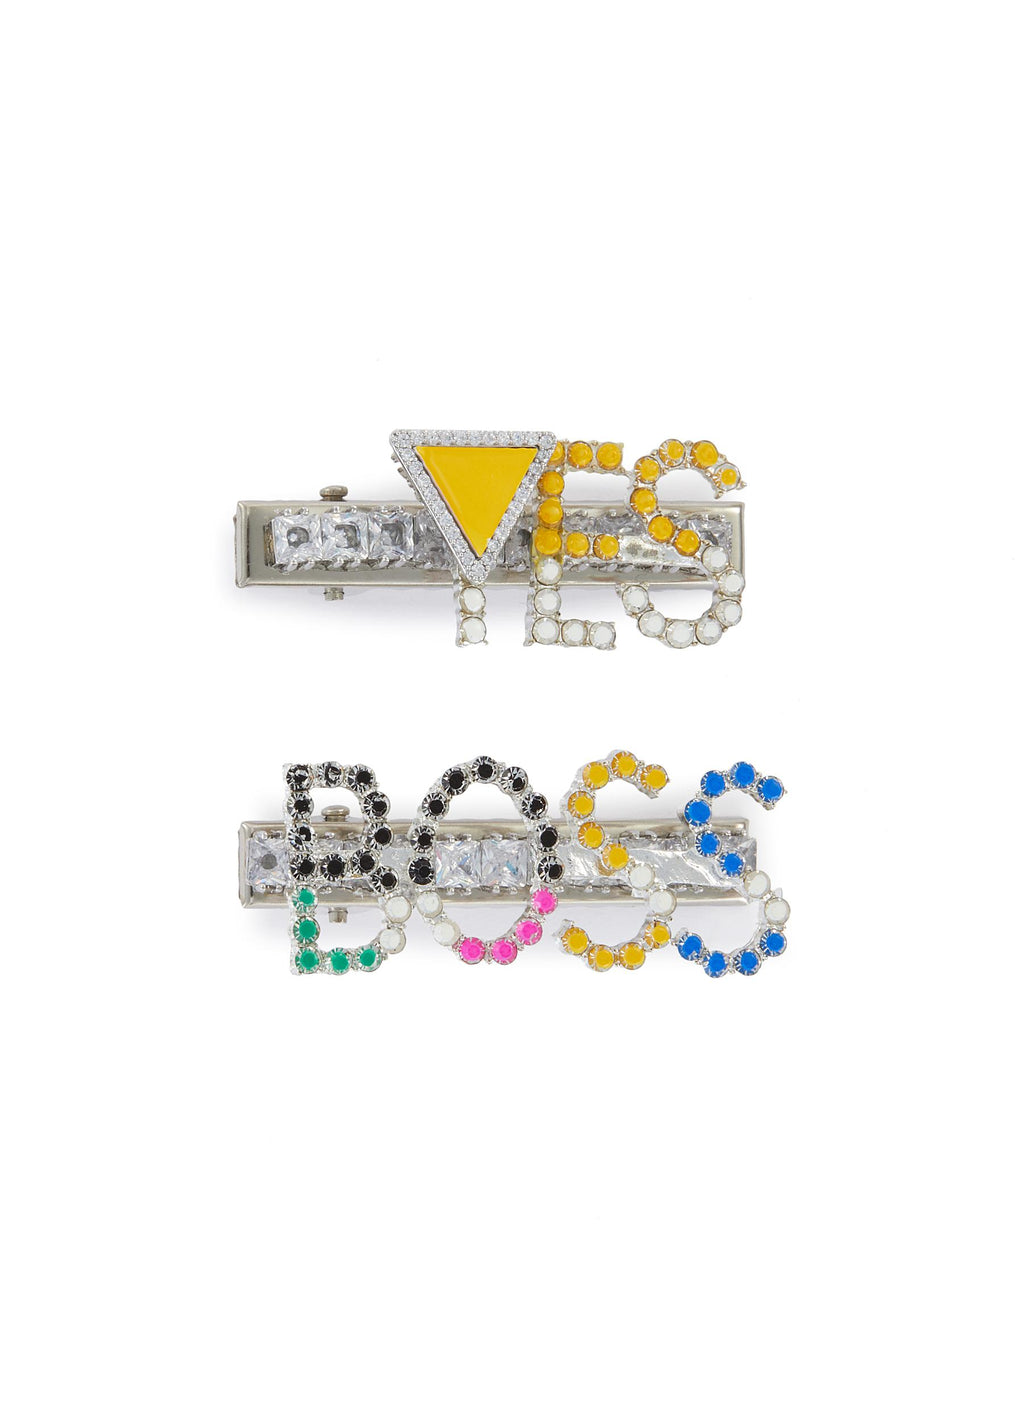 'Yes Boss' Crystal Embellished Hair Clips